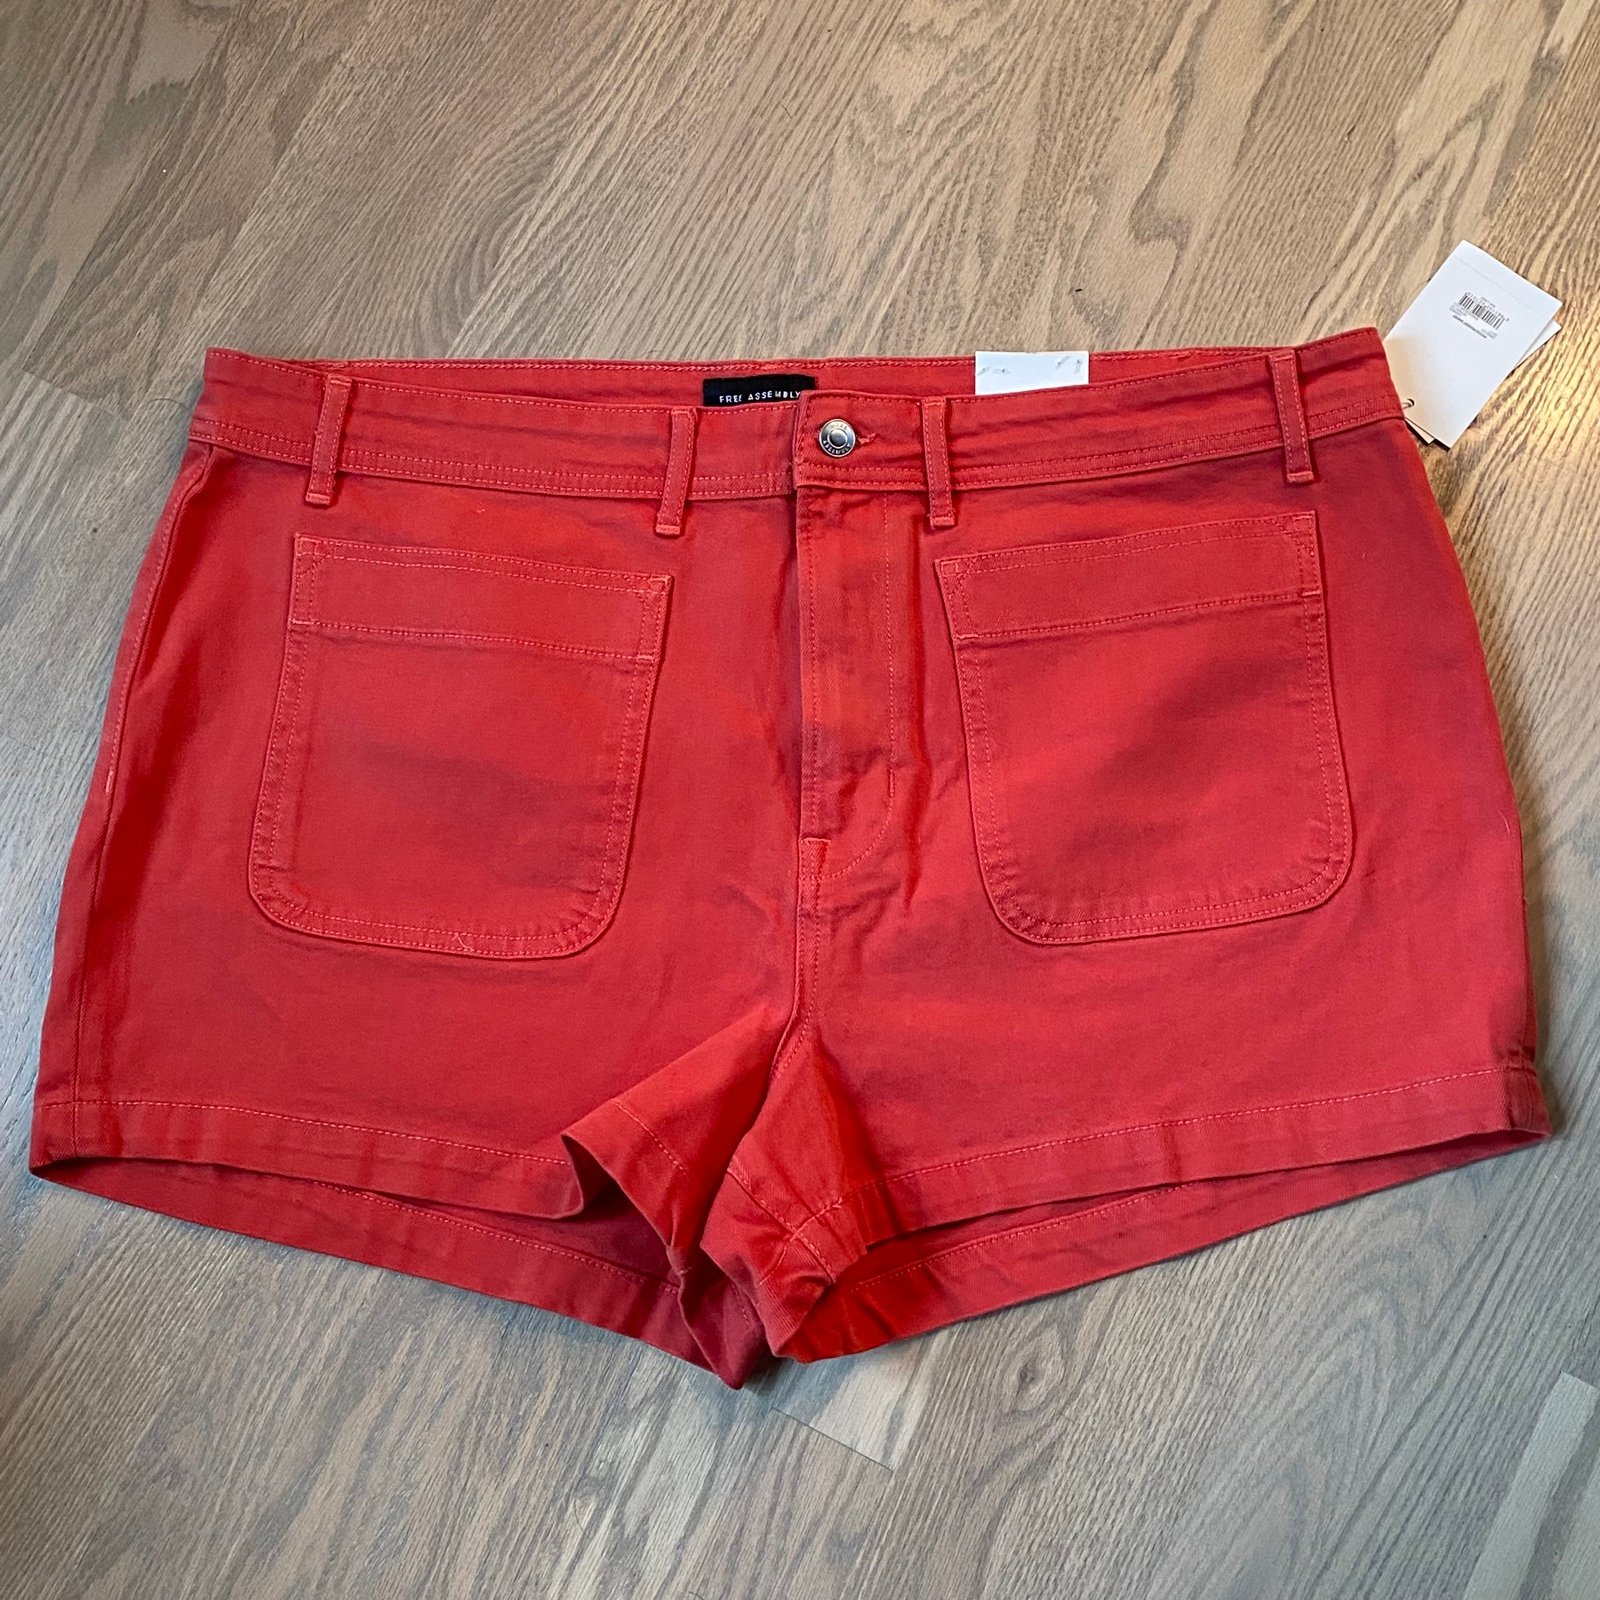 Special offer  NWT front pocket Jean red denim shorts s